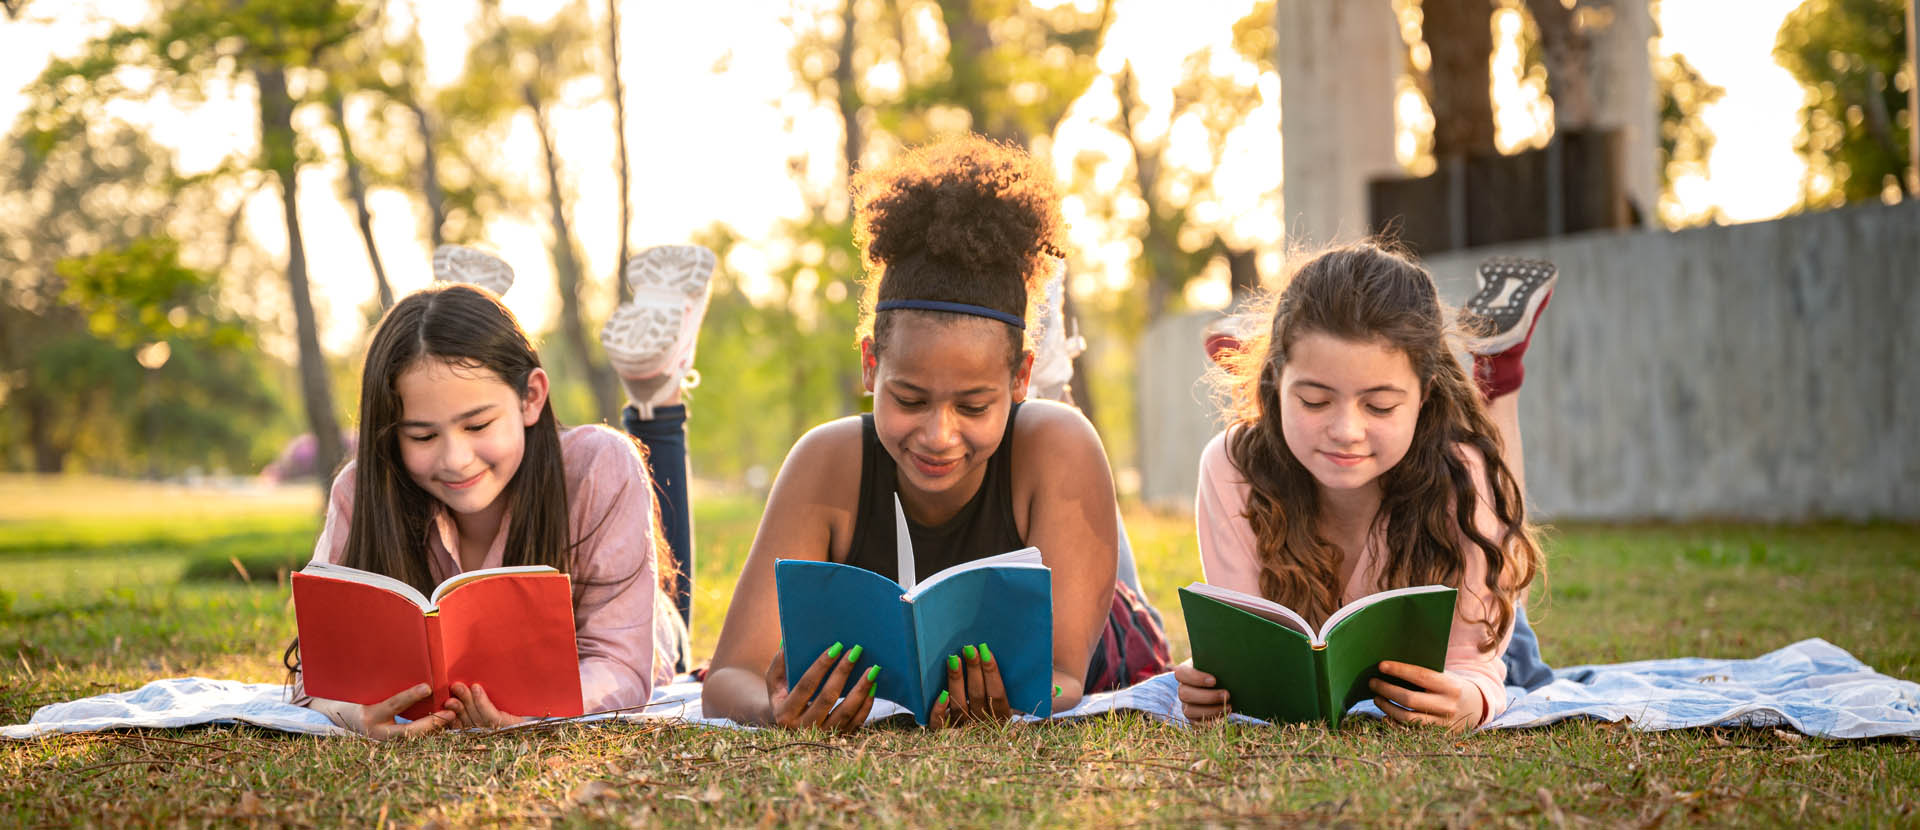 Why Summer Reading is Important and How to Make it Fun